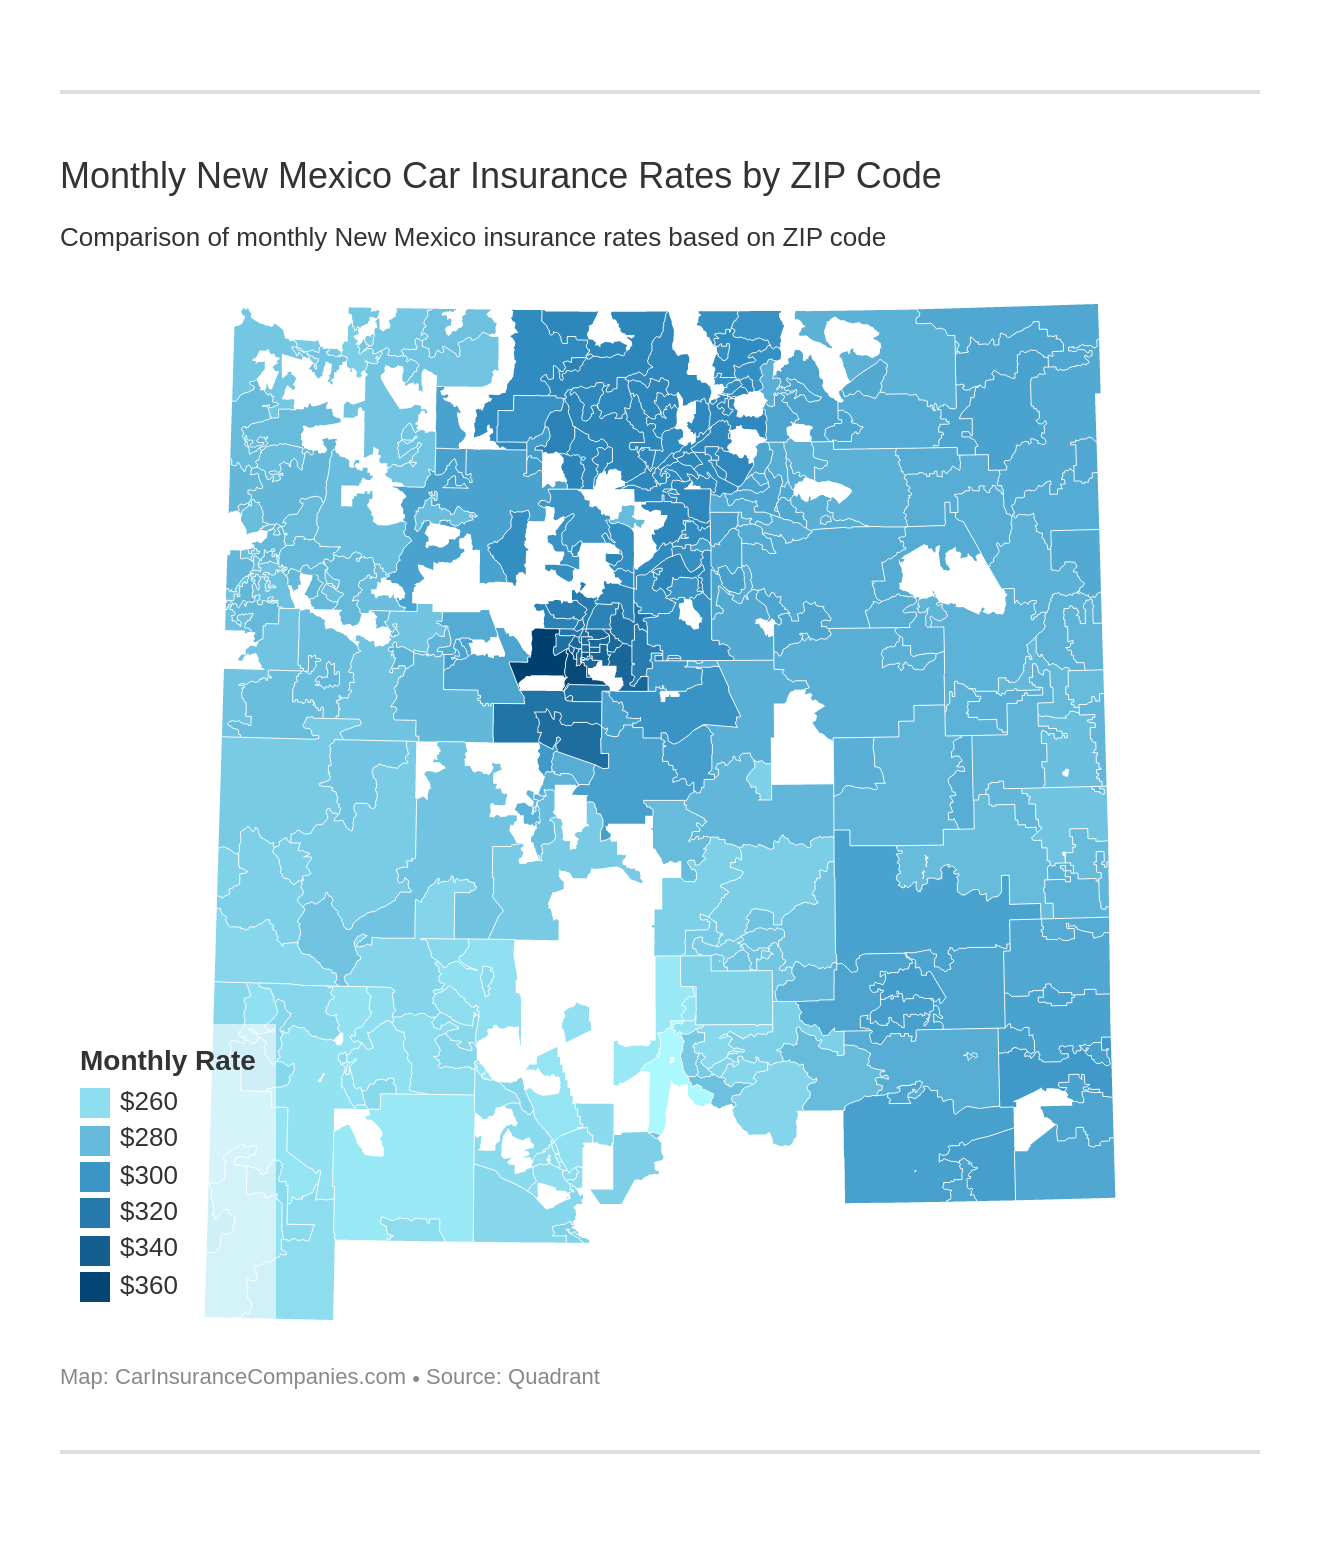 Monthly New Mexico Car Insurance Rates by ZIP Code